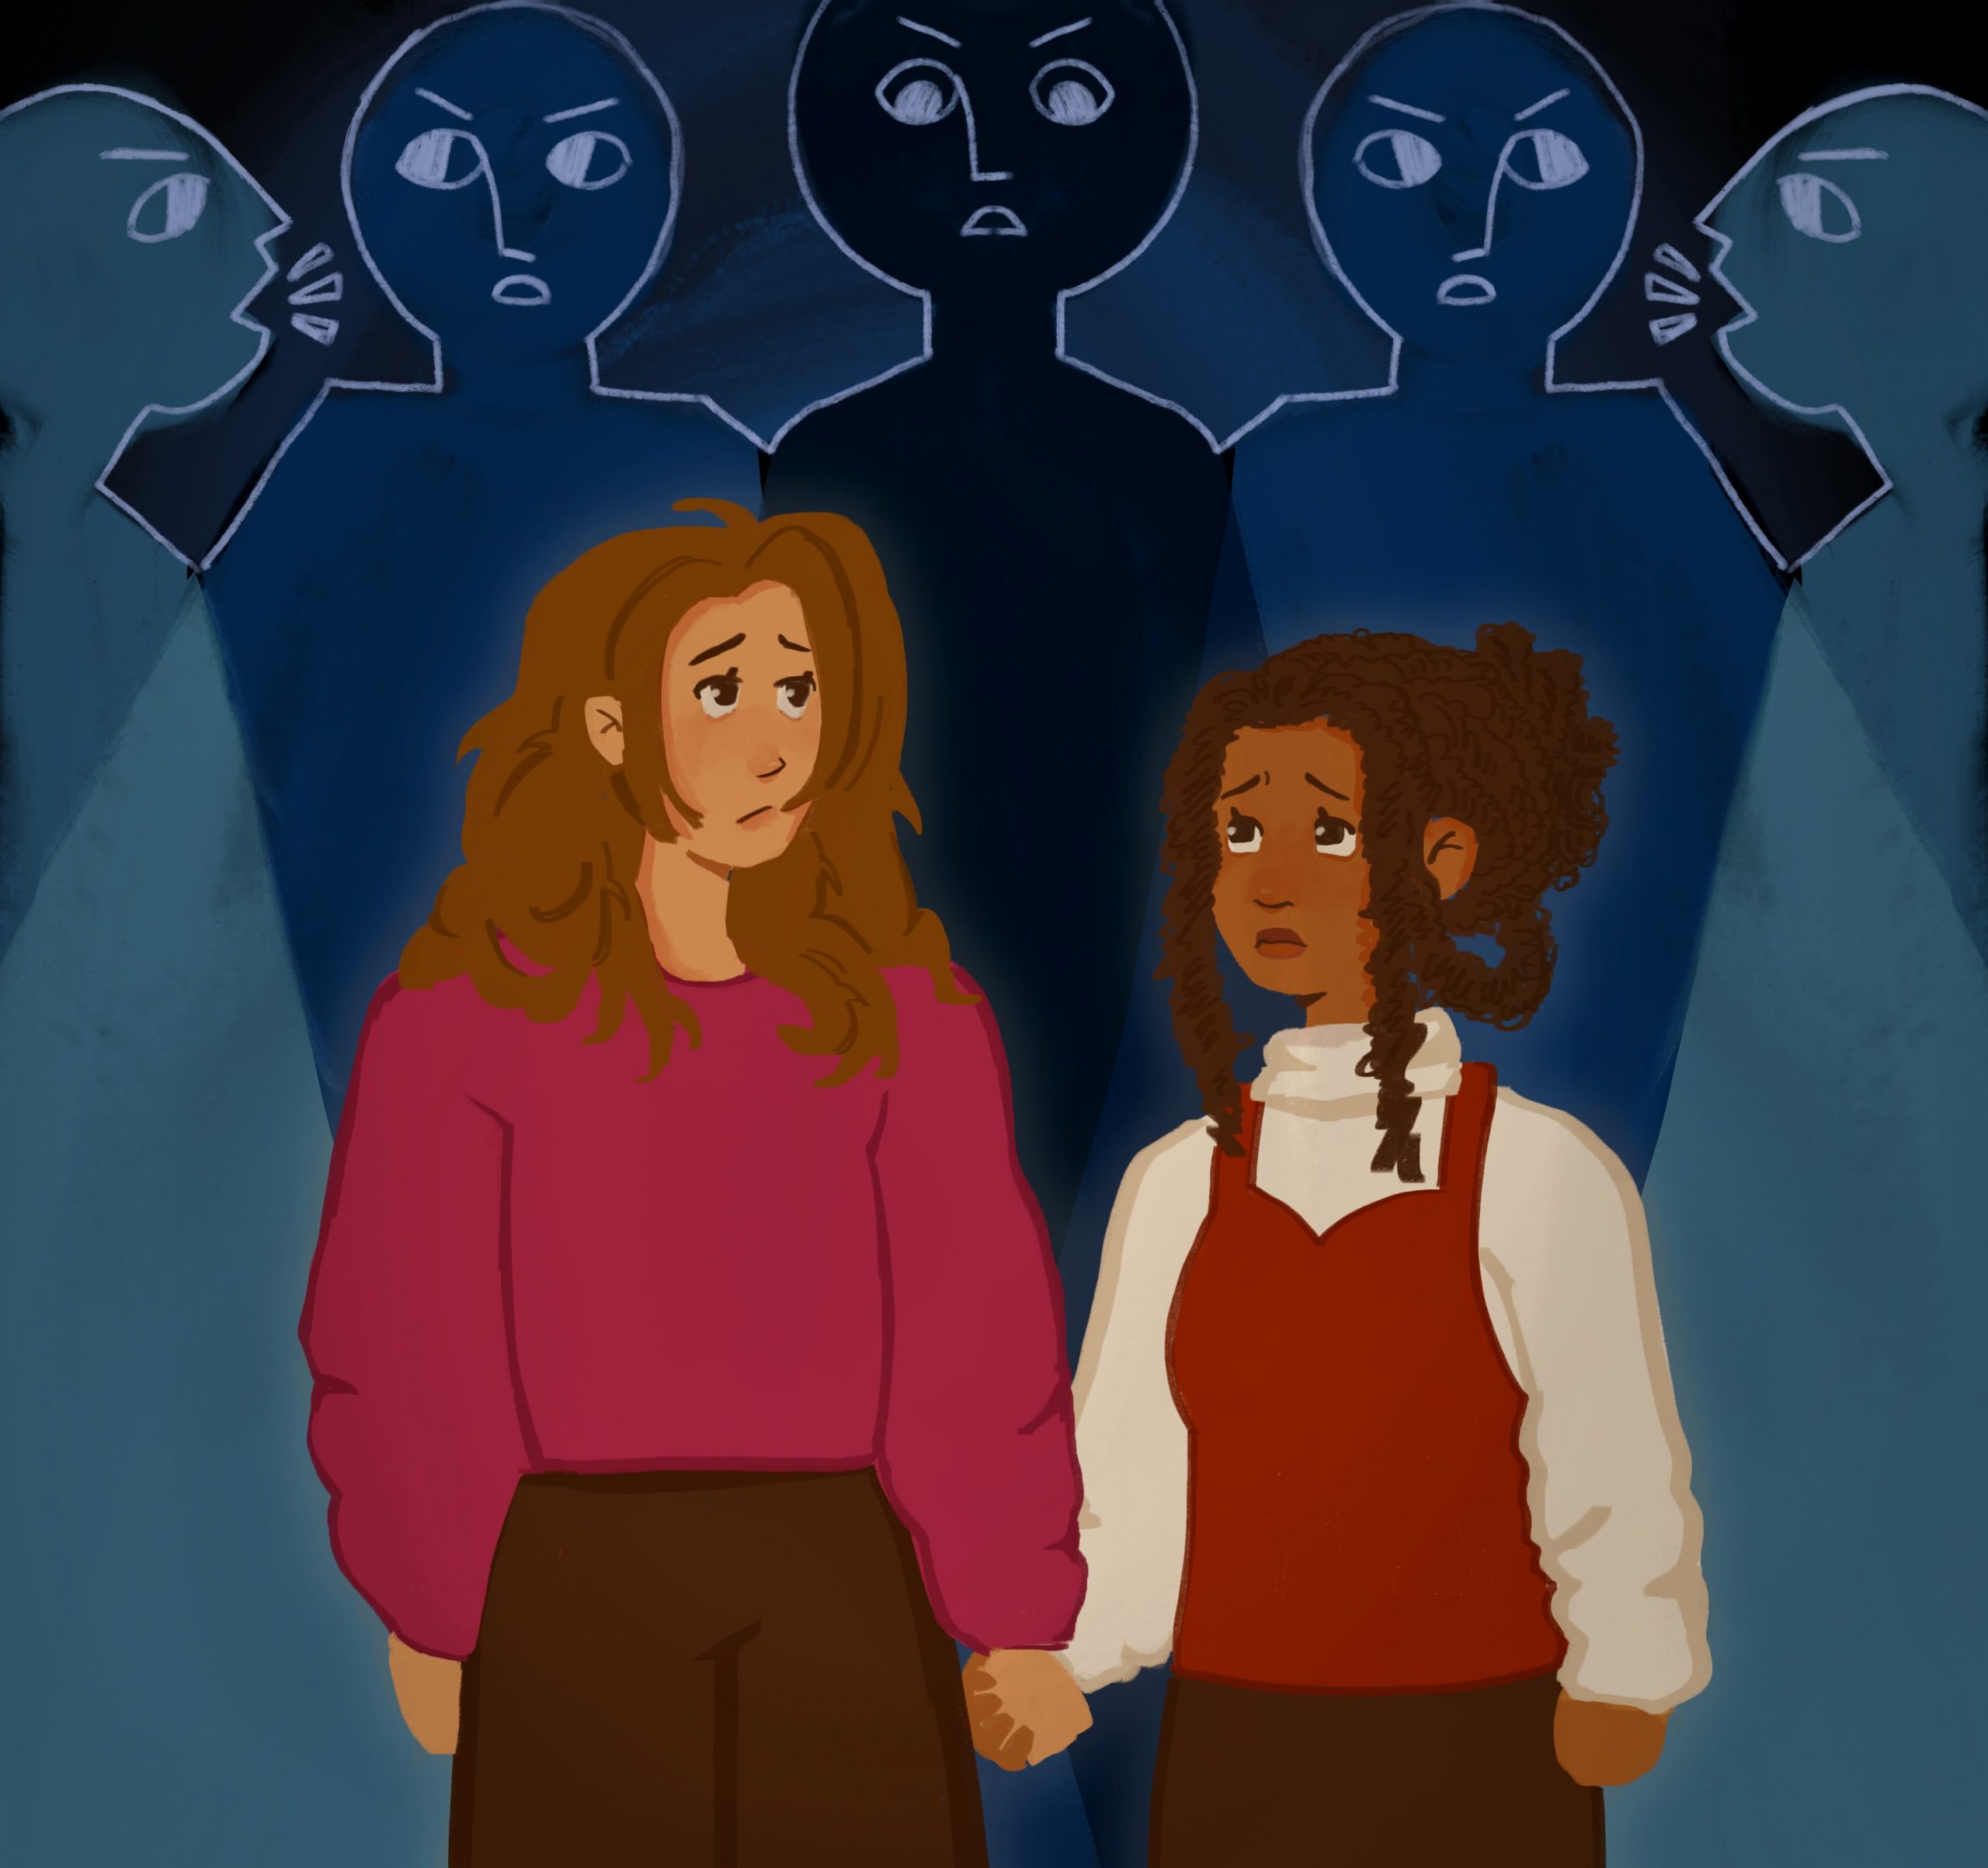 An illustration of a light-skinned girl with long light brown hair in a pink sweater holding hands with a girl with brown skin and her dark brown curls tied up in a bun in a white turtleneck and red shirt. They both look backwards and up, their faces filled with worry. Blue silhouettes of people with angry faces loom above them.